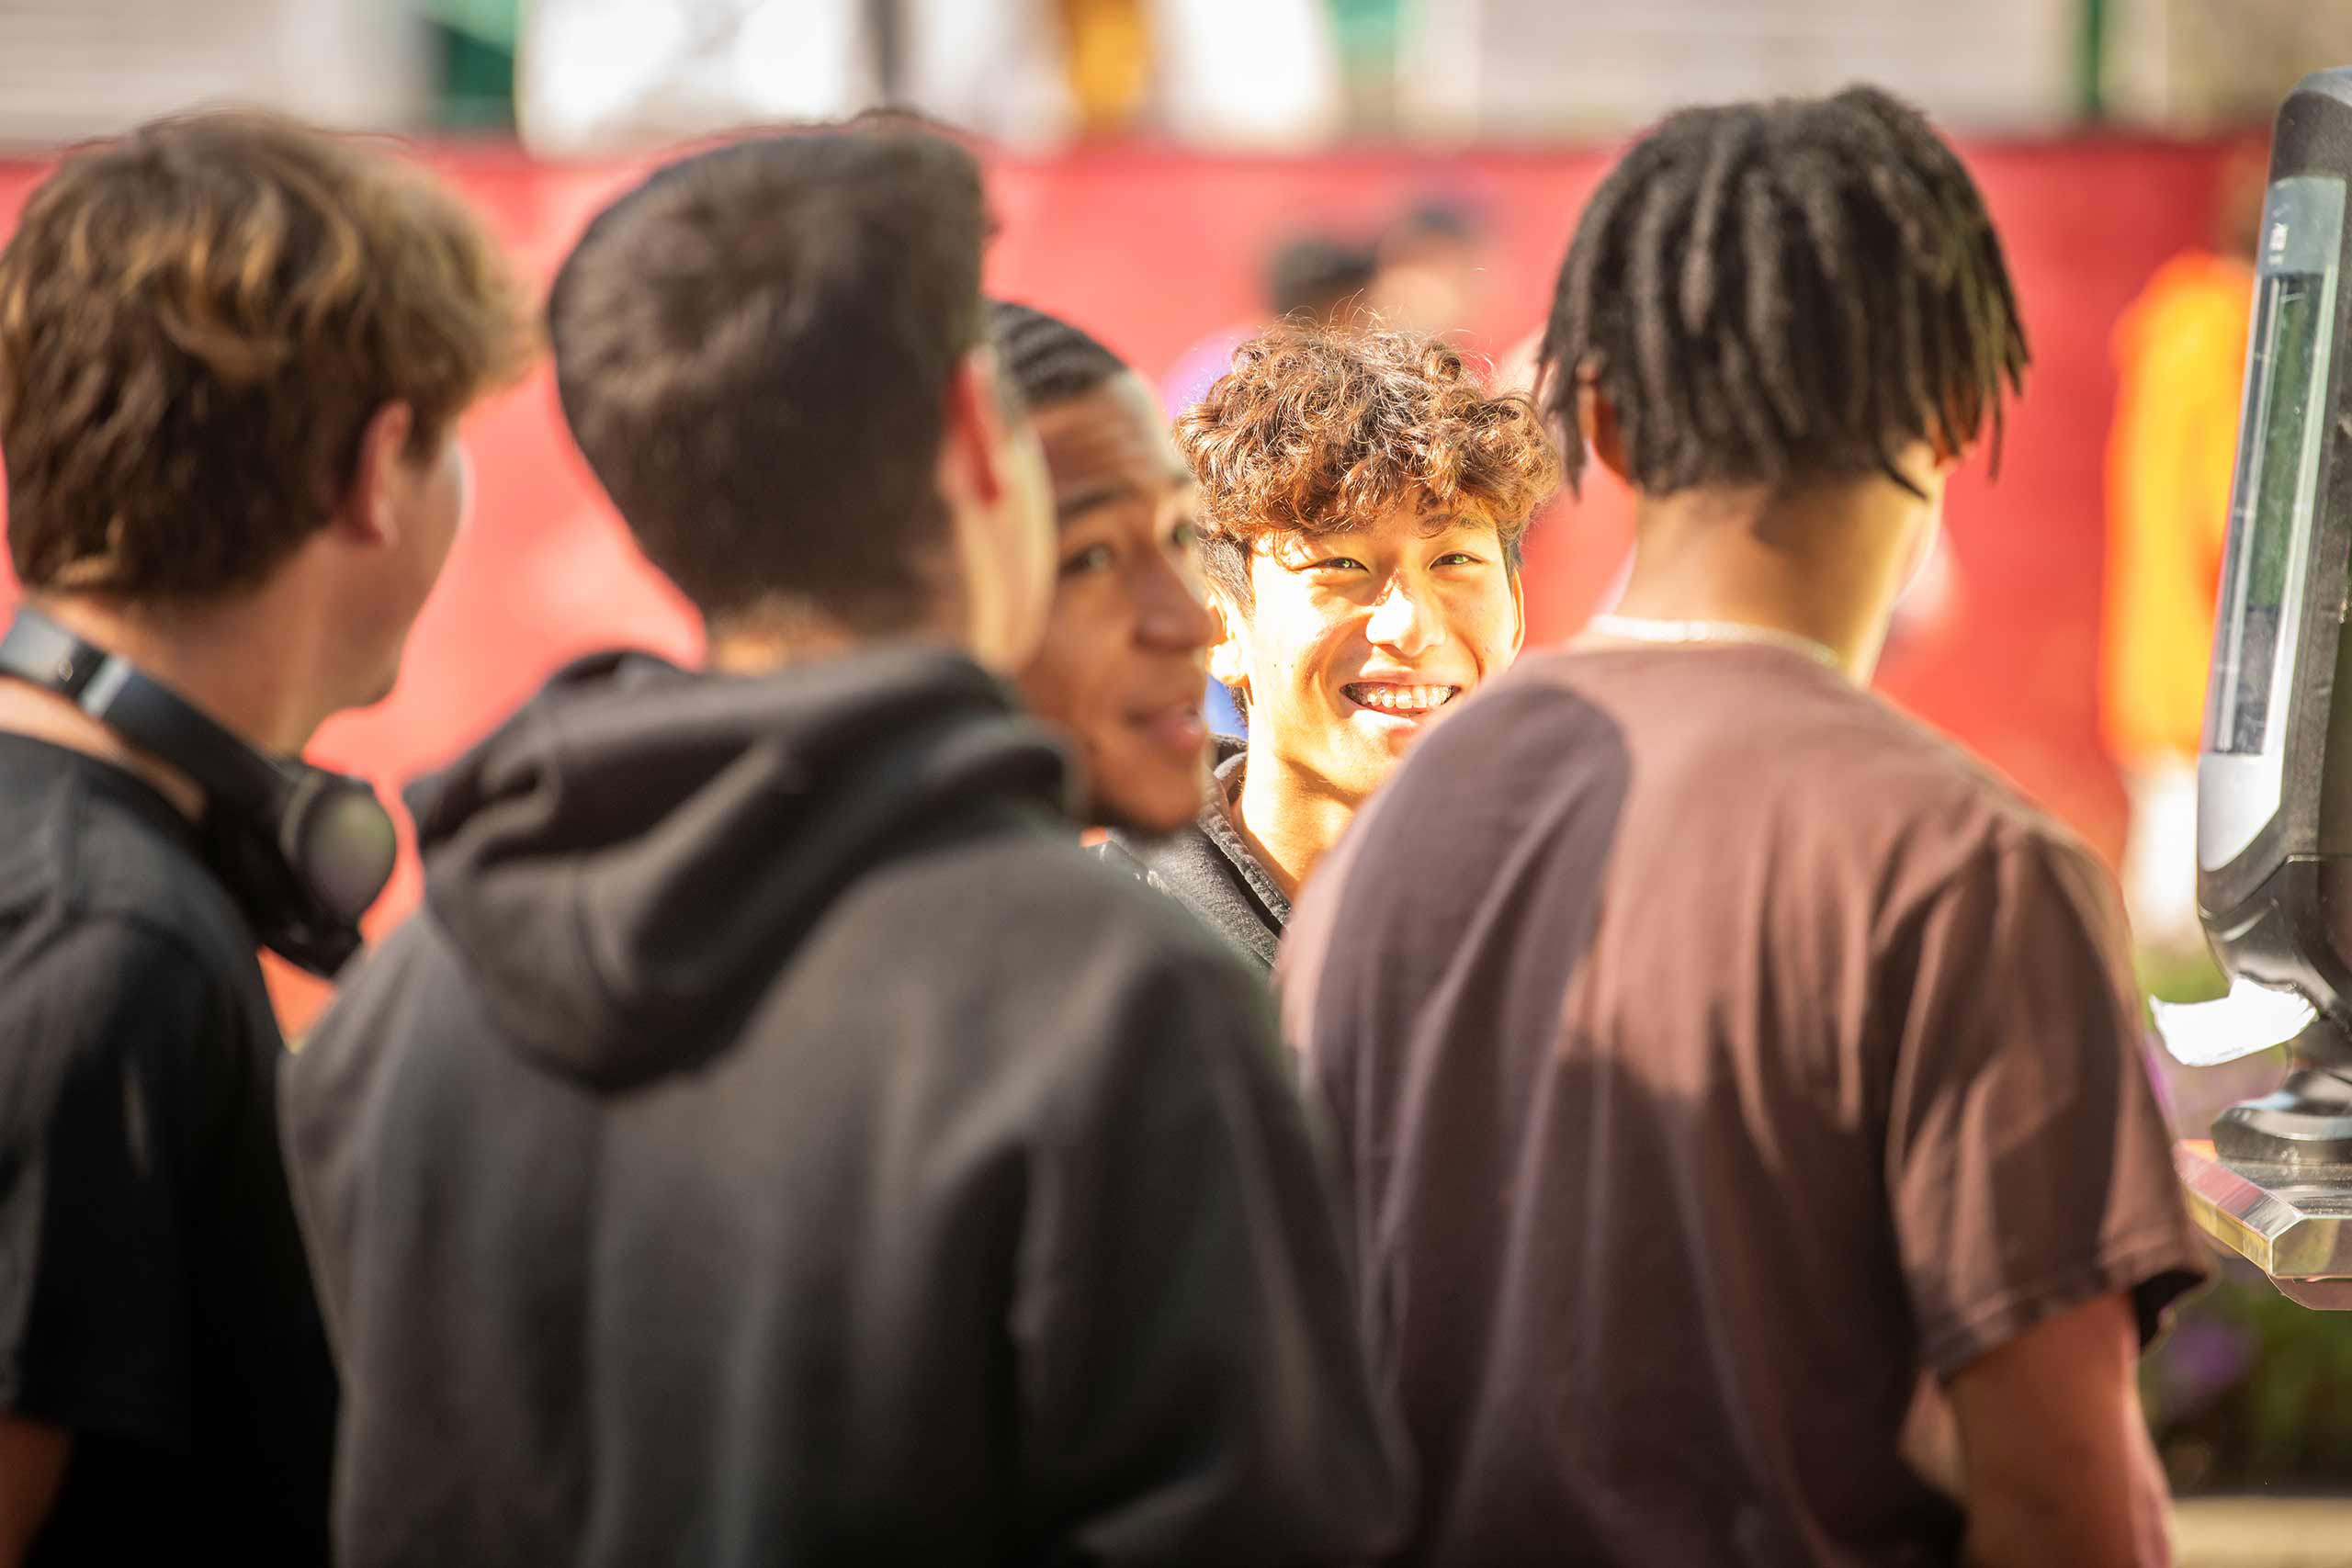 A group of students laughing together at a campus mental wellness event.